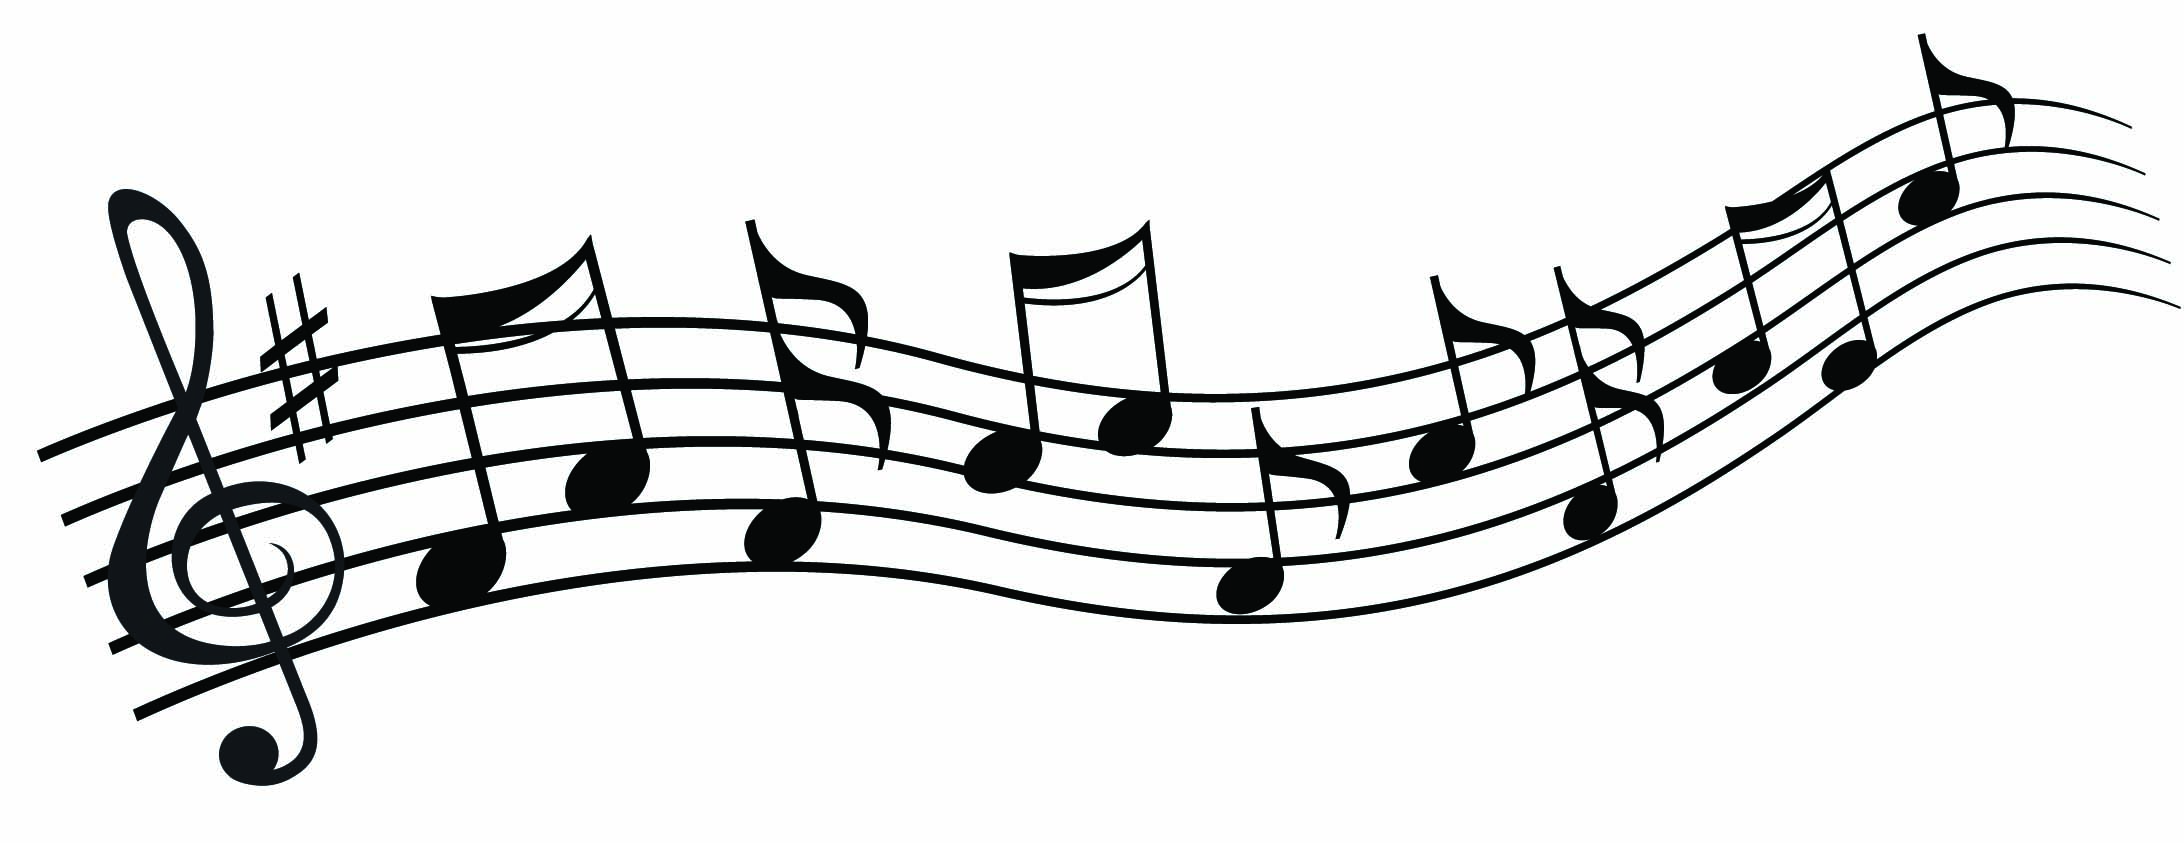 fp musical image clipart